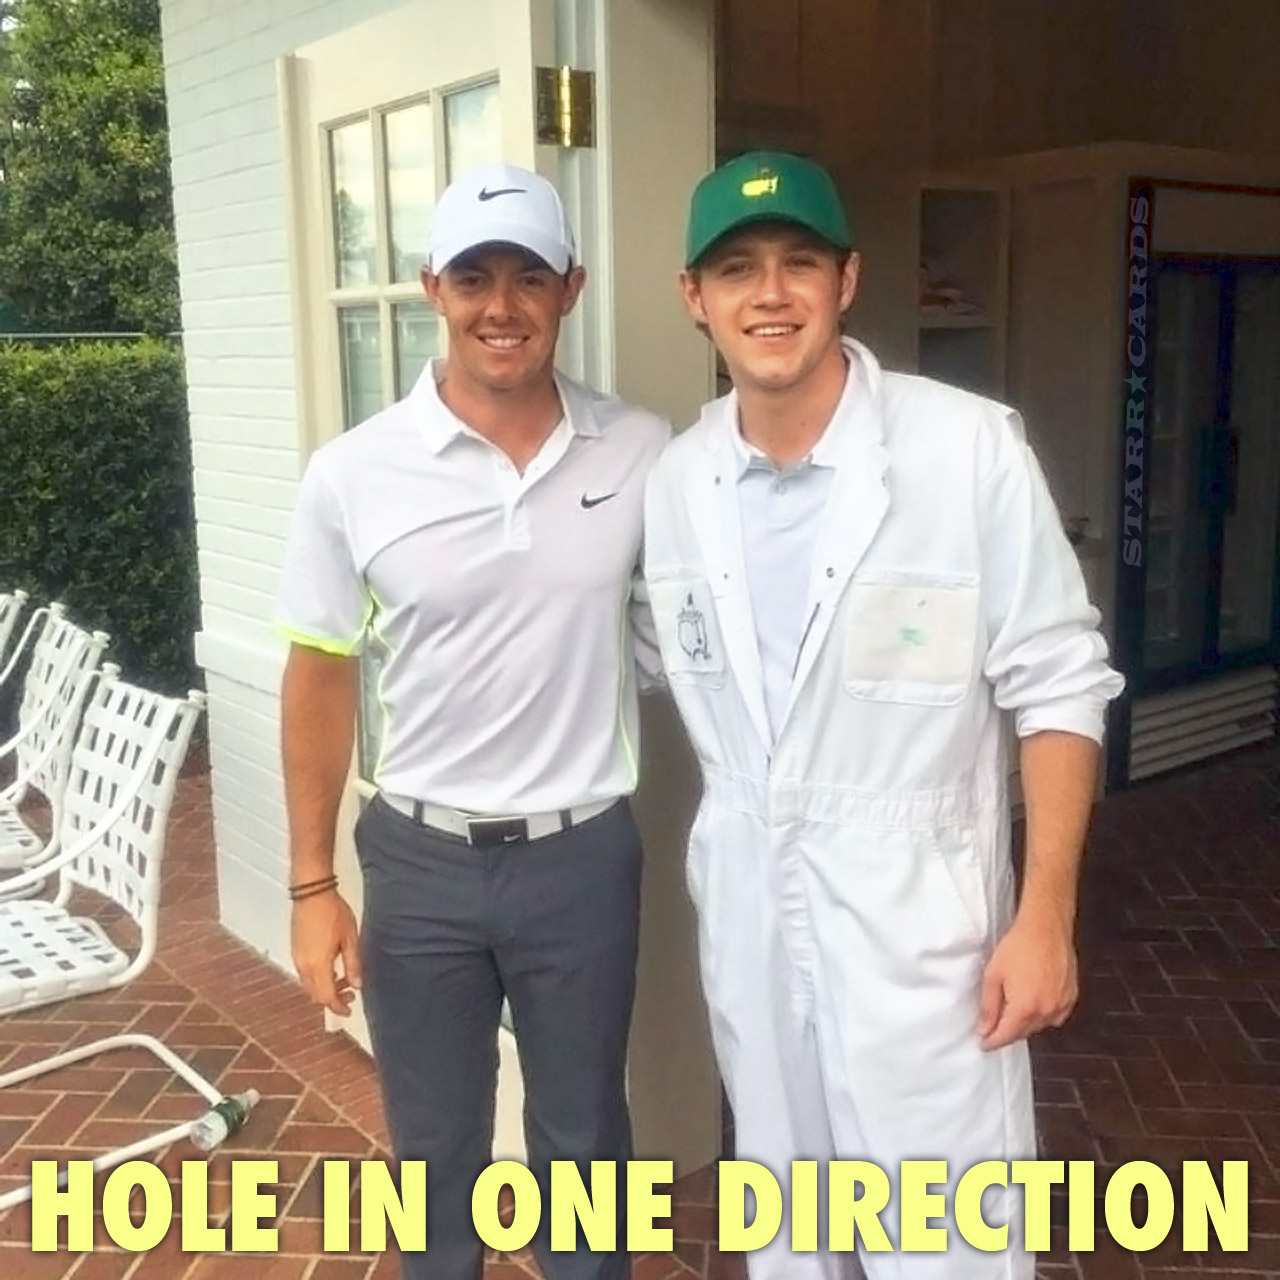 Niall Horan of One Direction fame poses with Rory McIlroy